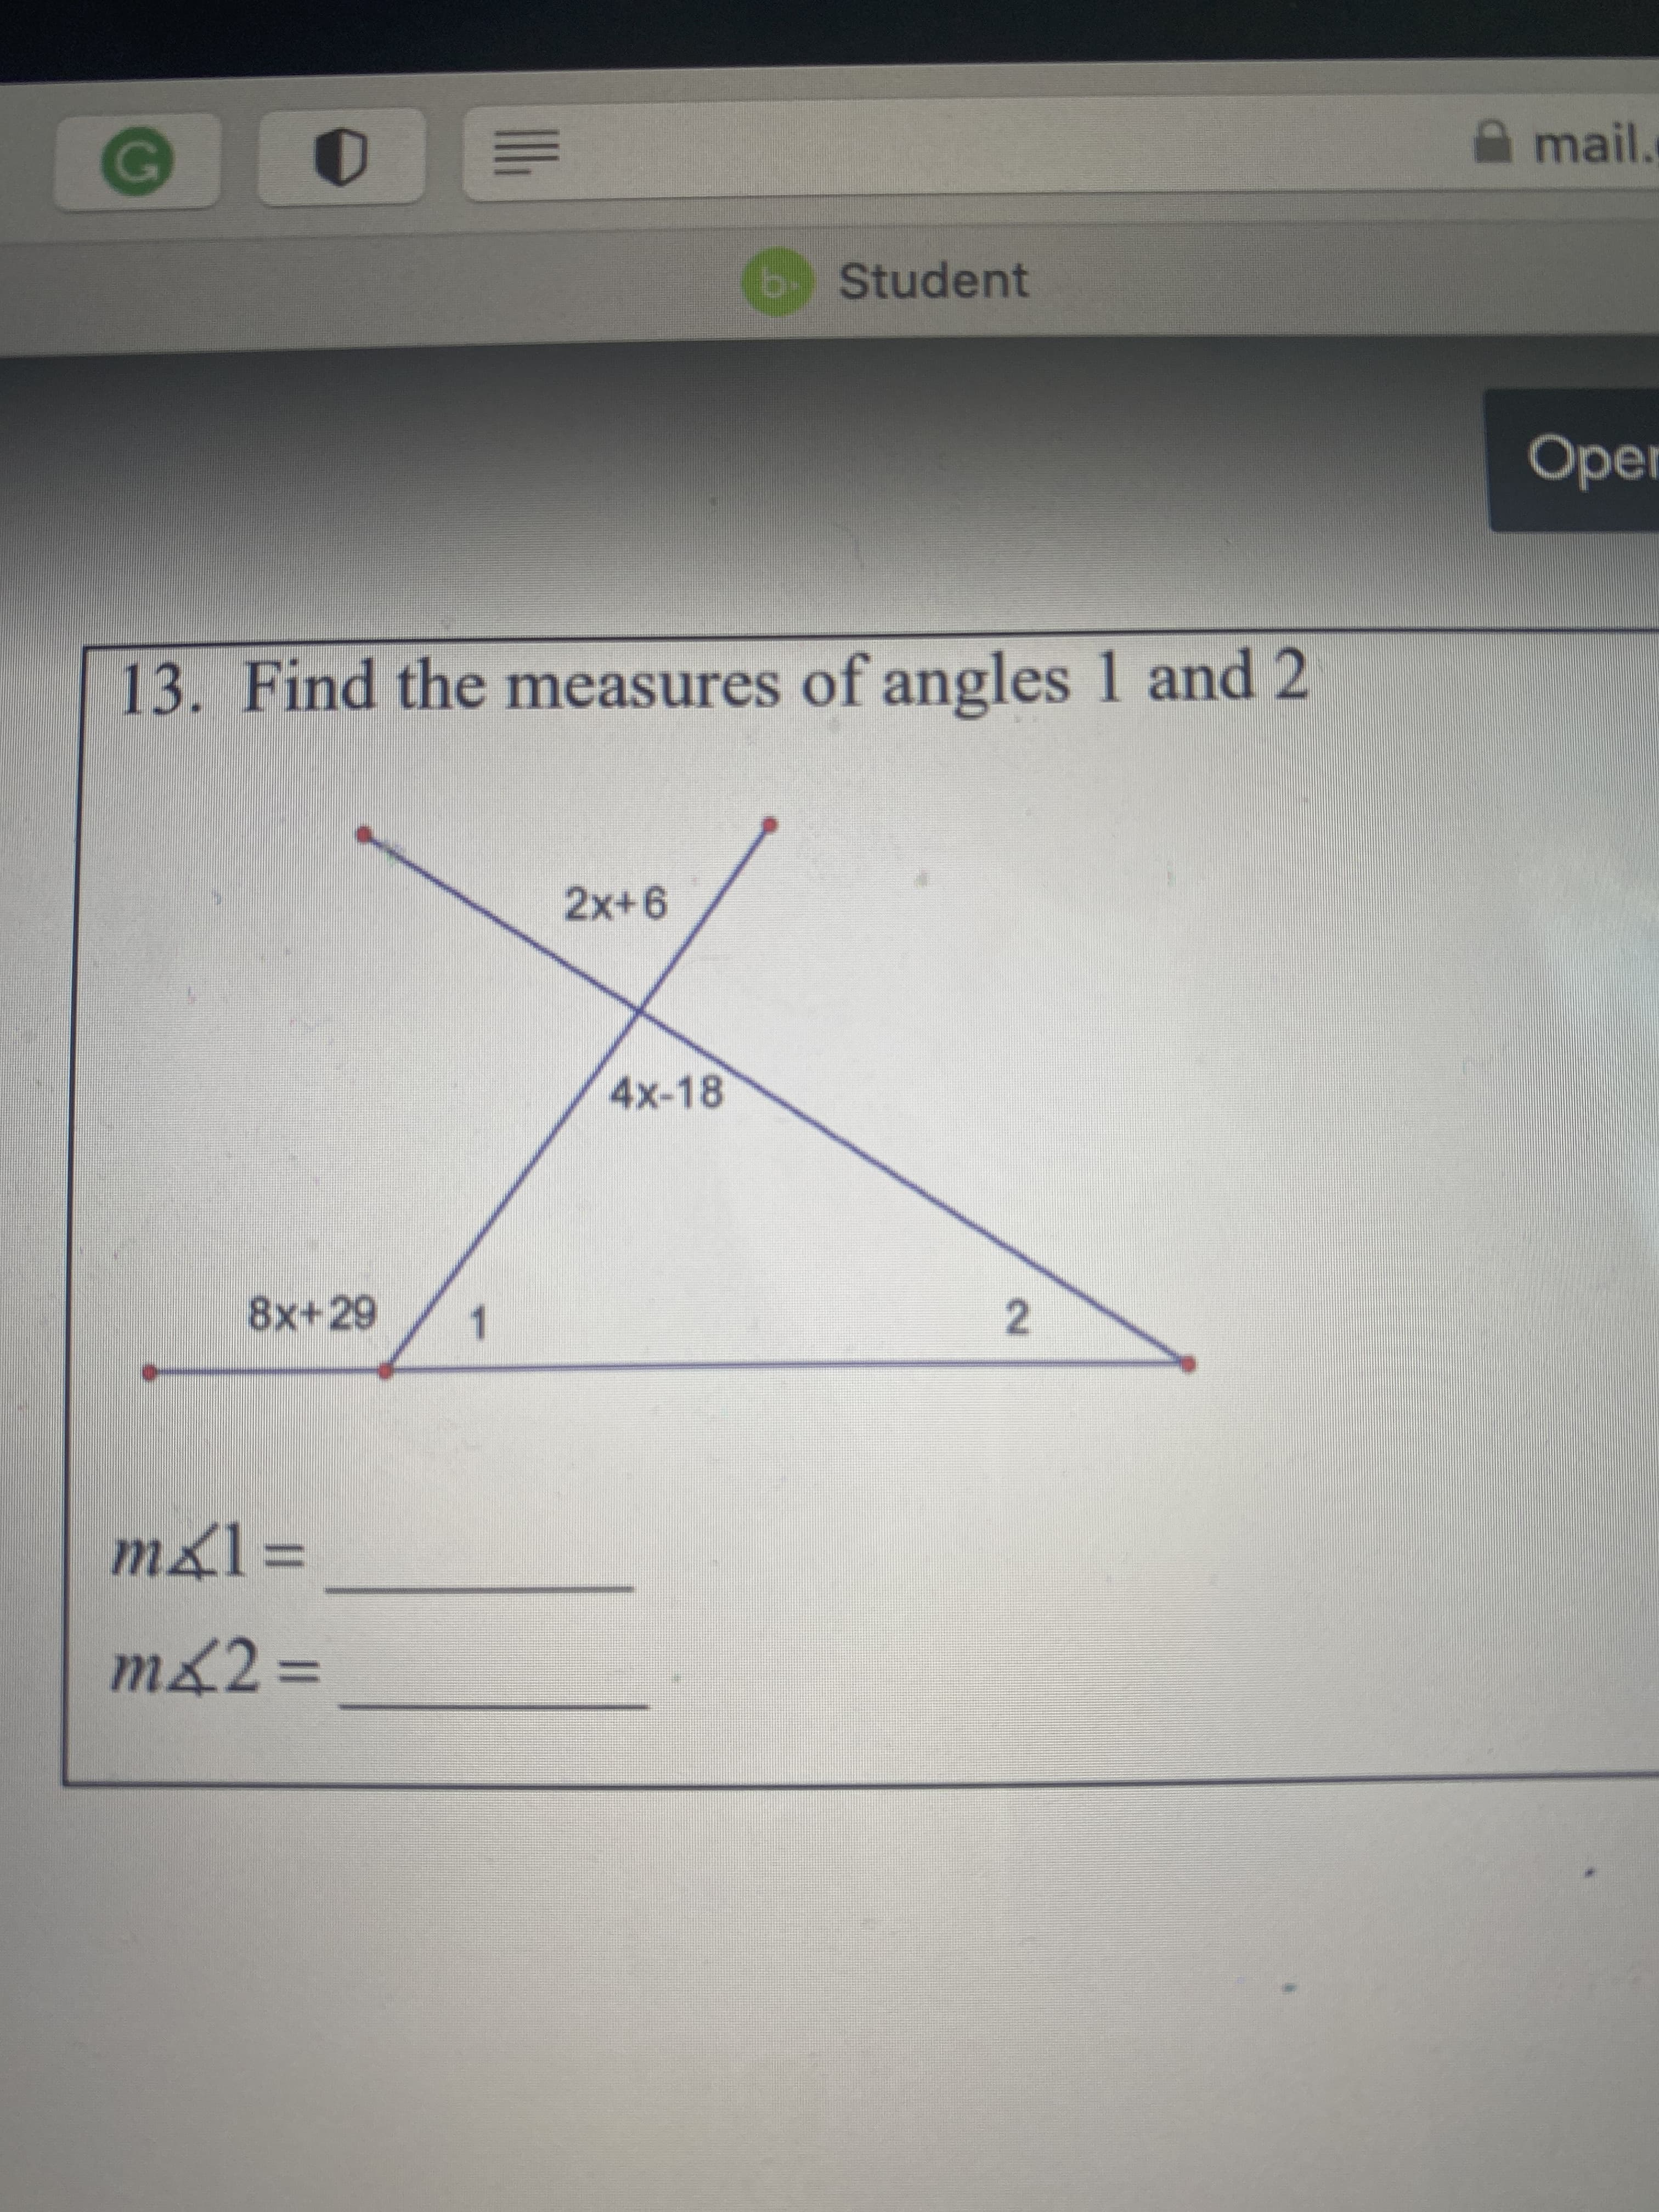 Find the measures of angles 1 and 2
